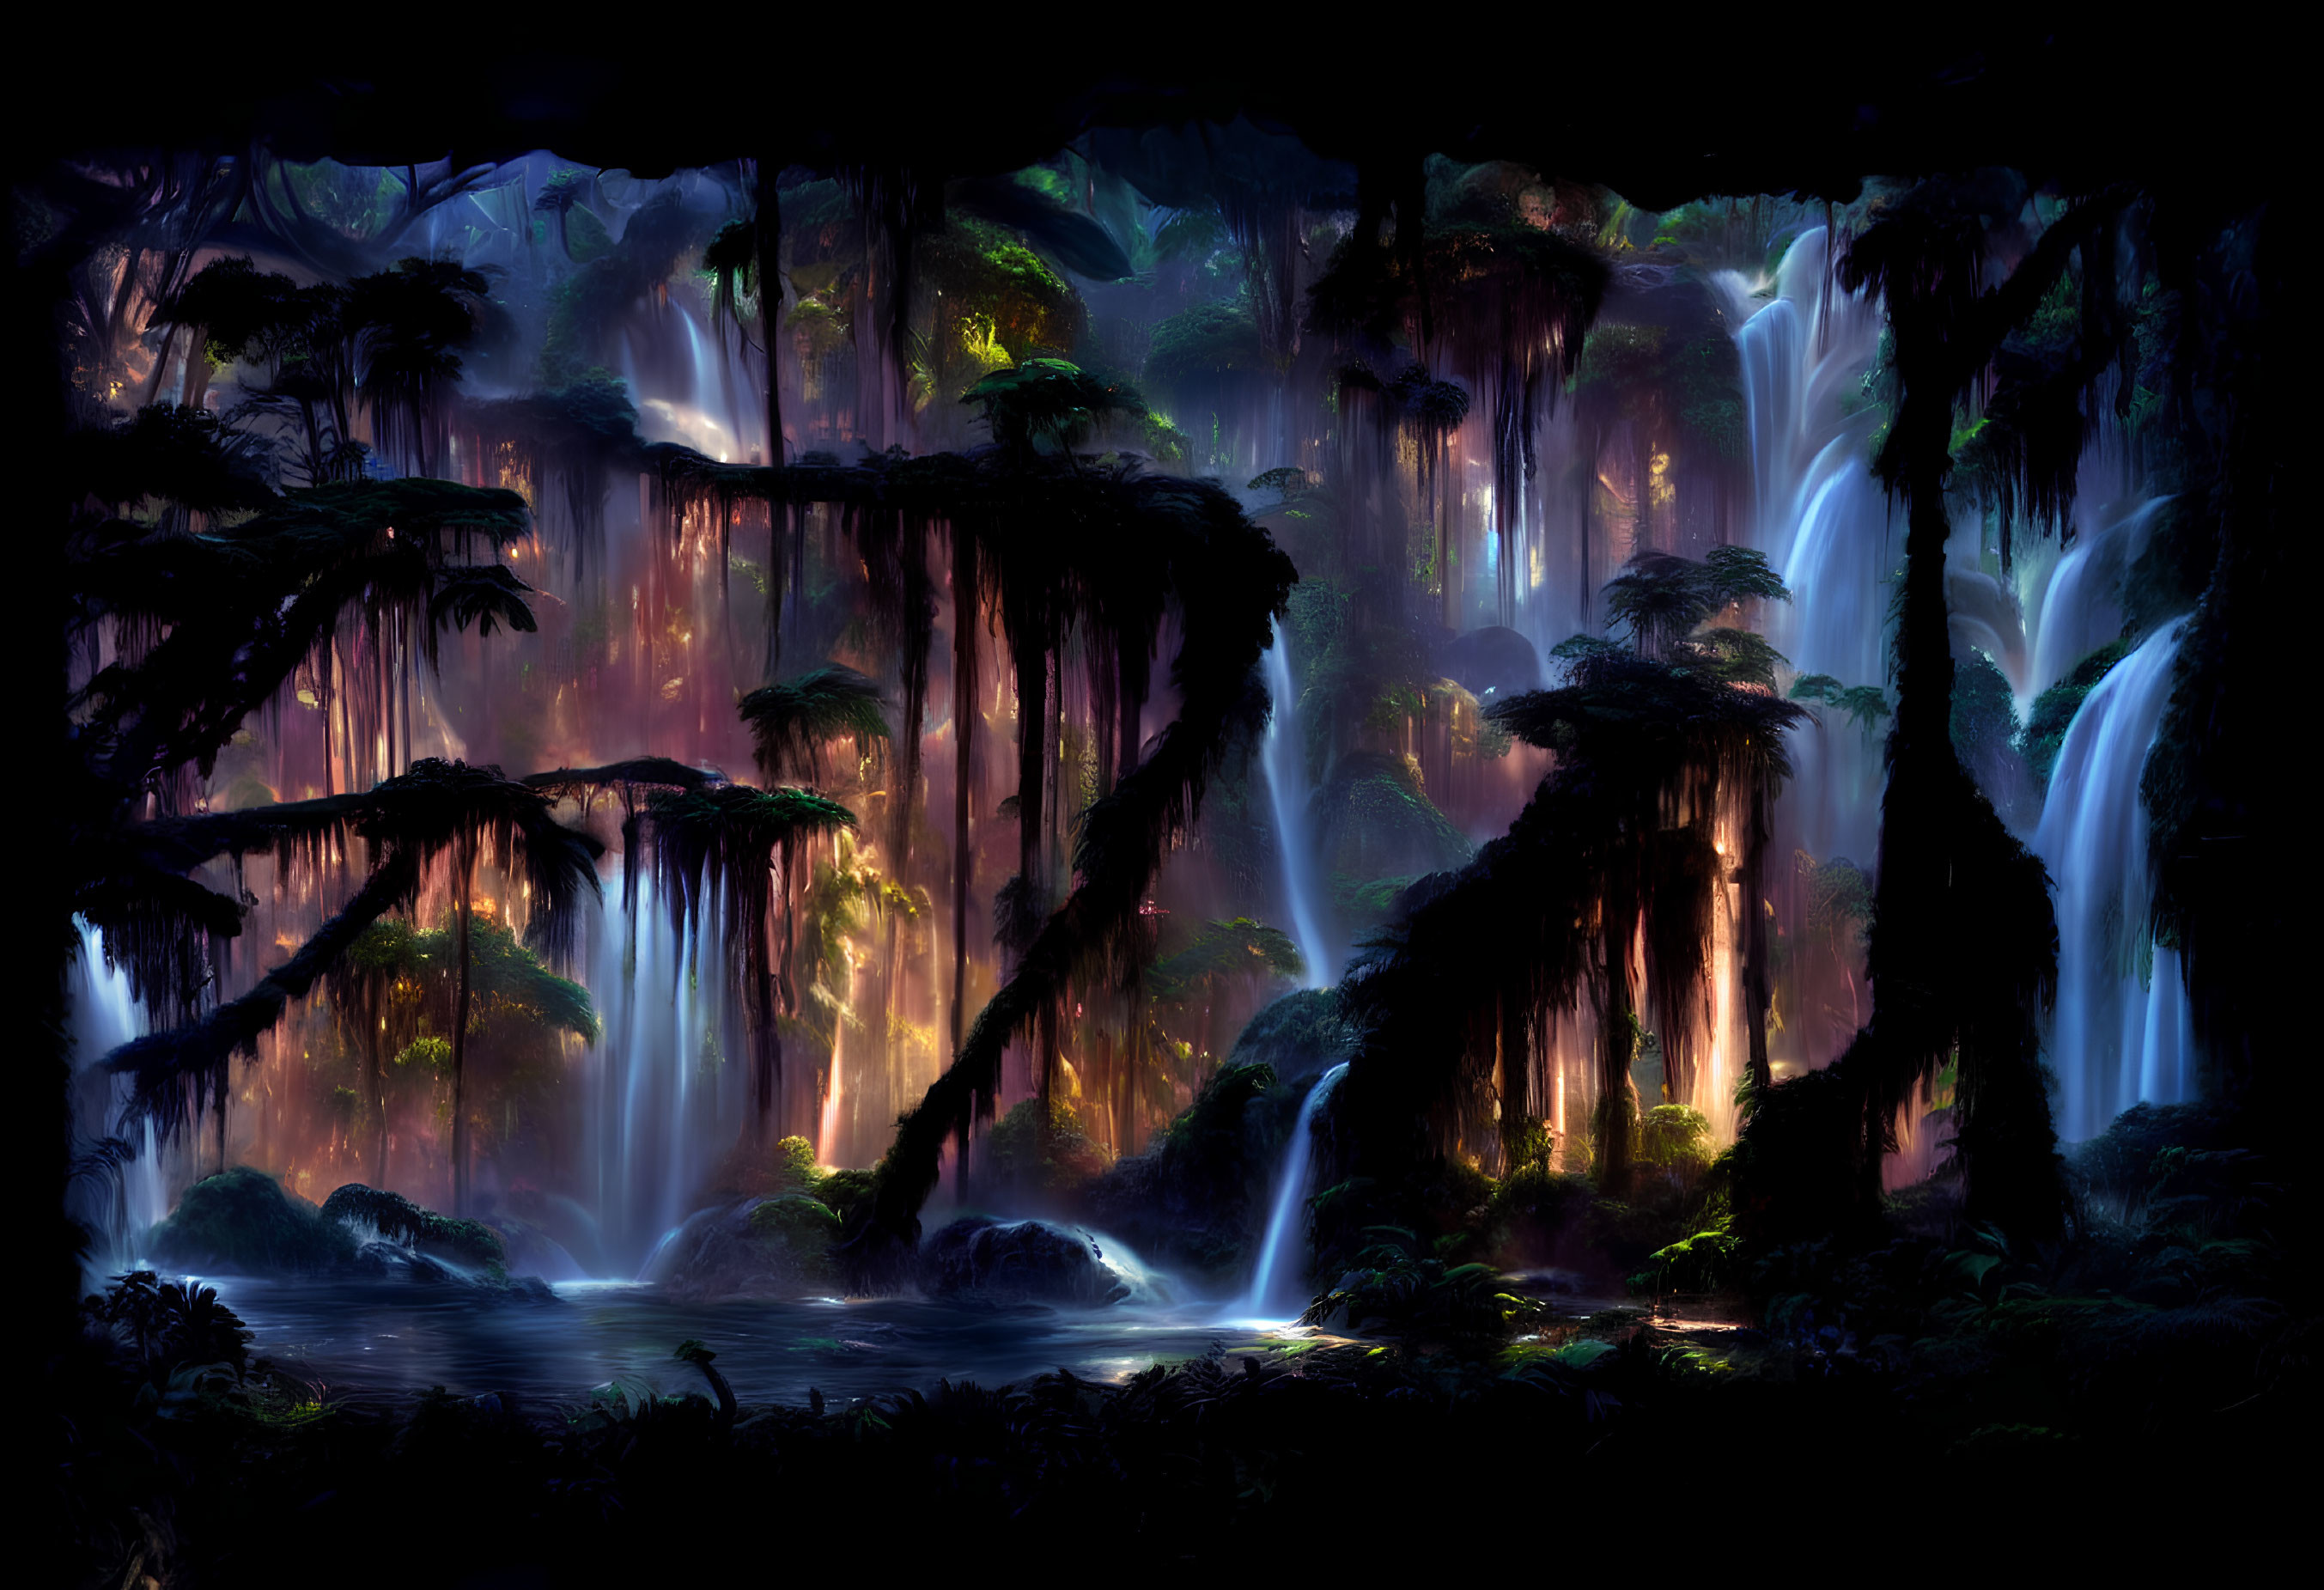 Twilight jungle with waterfalls and glowing reflections